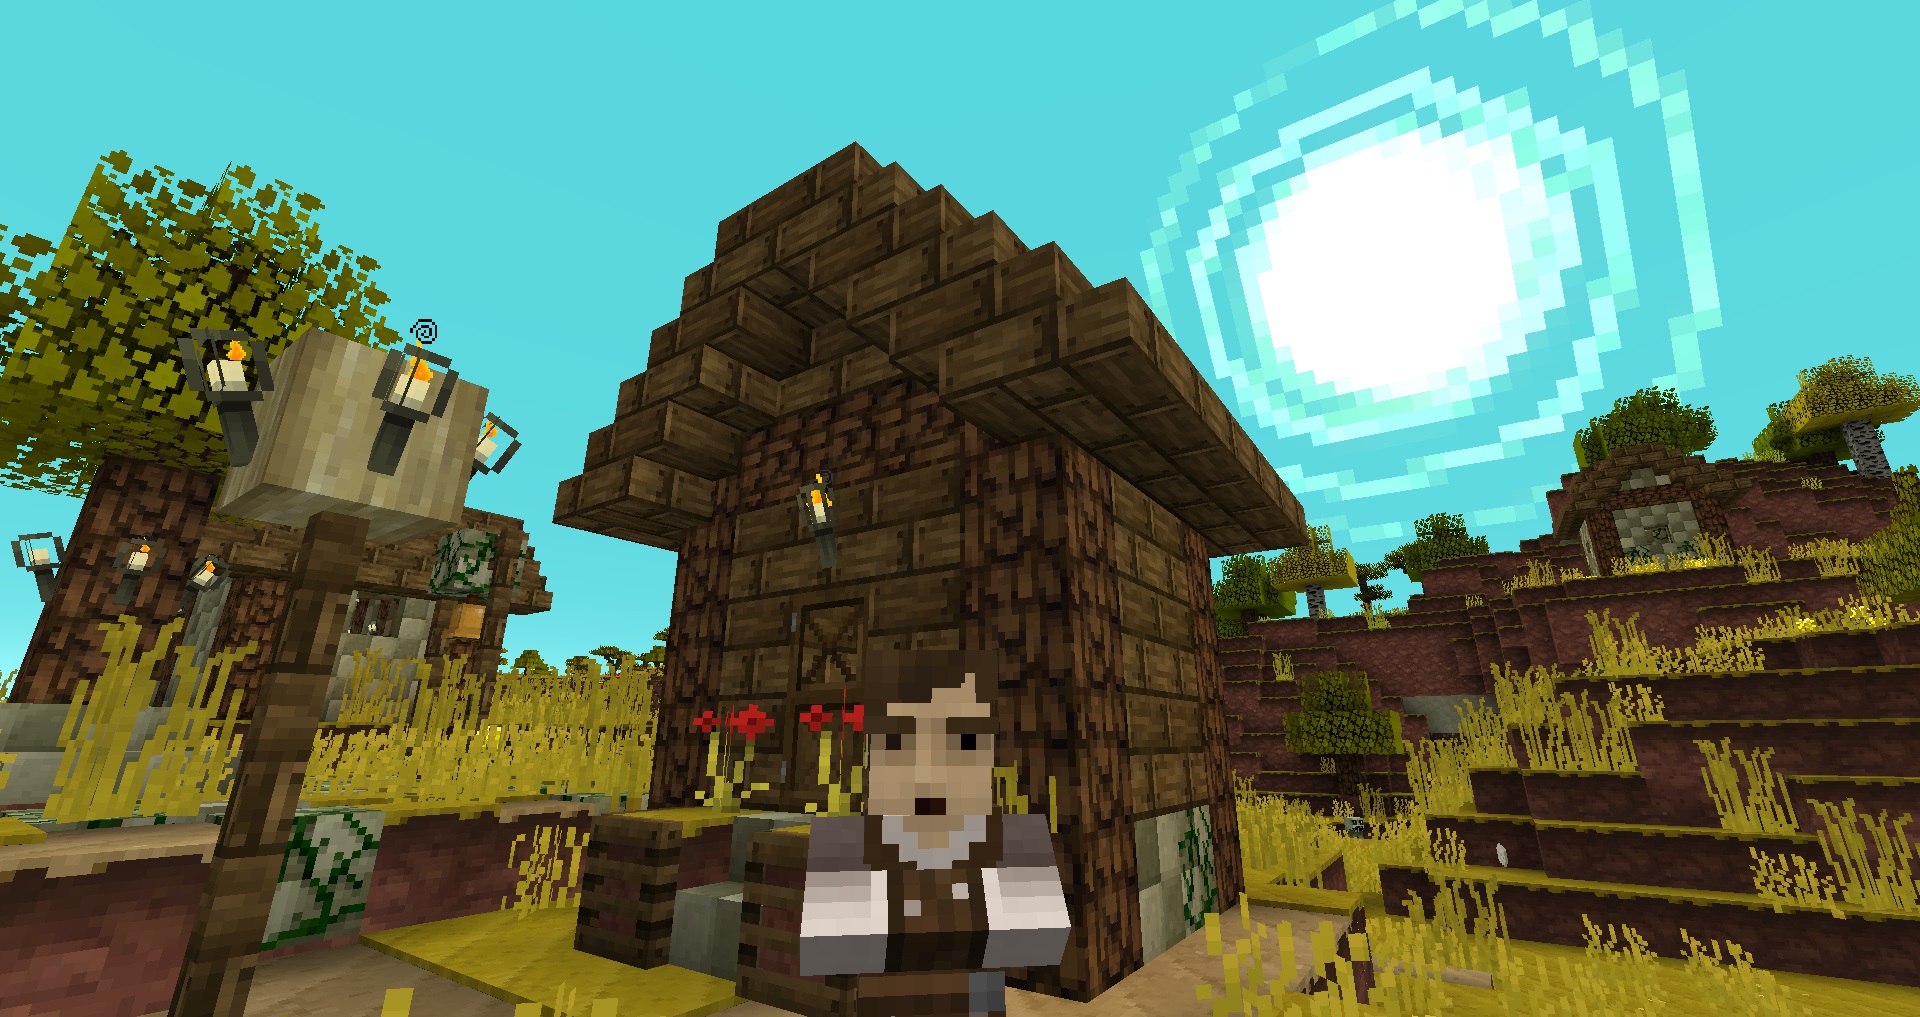 Minecraft texture pack - Joliecraft - A whimsical sun rises in the sky behind a villager with a surprised face walking out of a house with muted wood colors